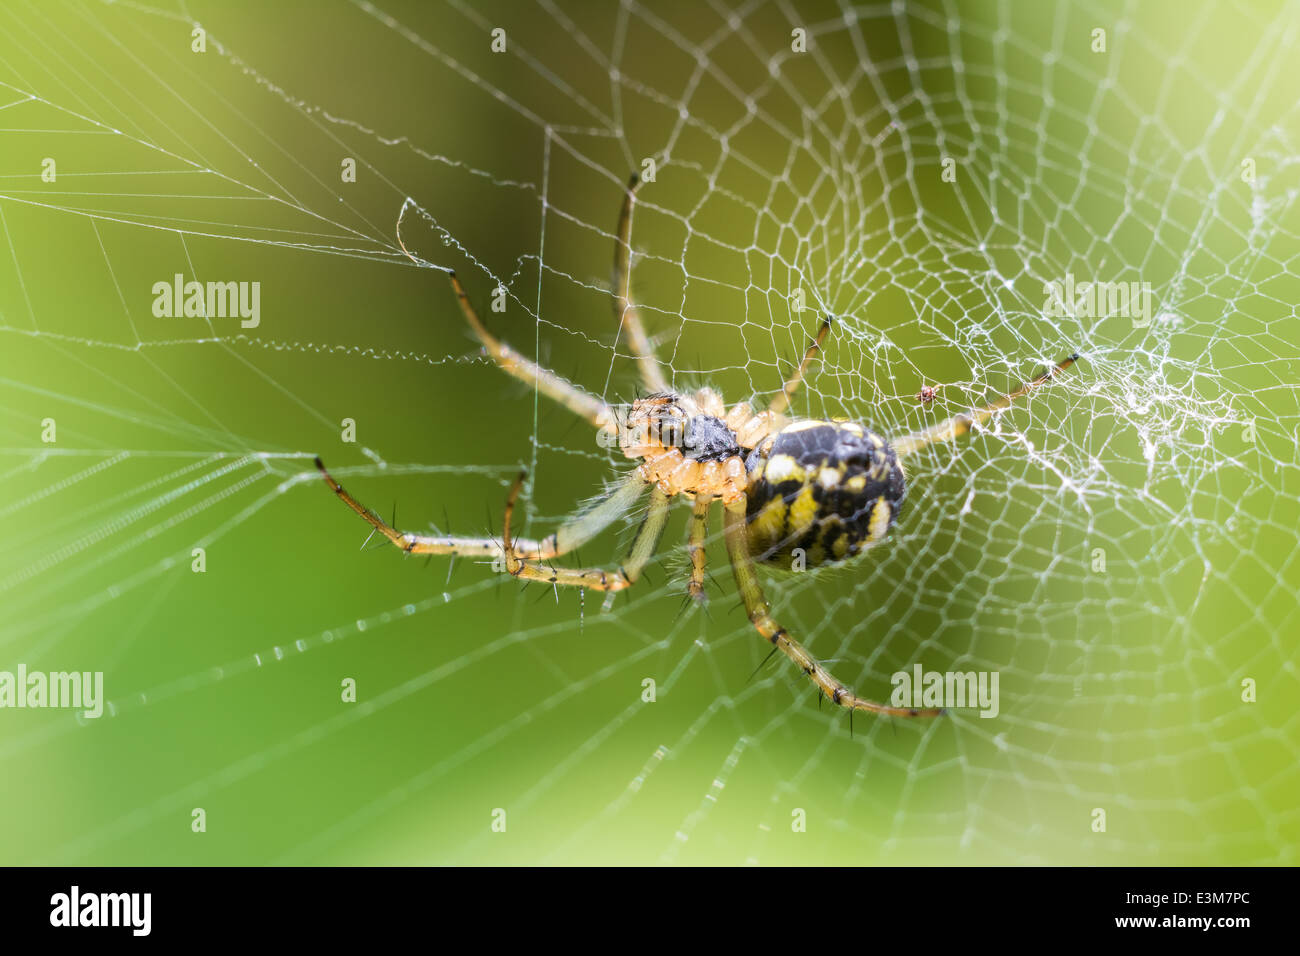 Big Spider On Web Waiting For Prey Stock Photo